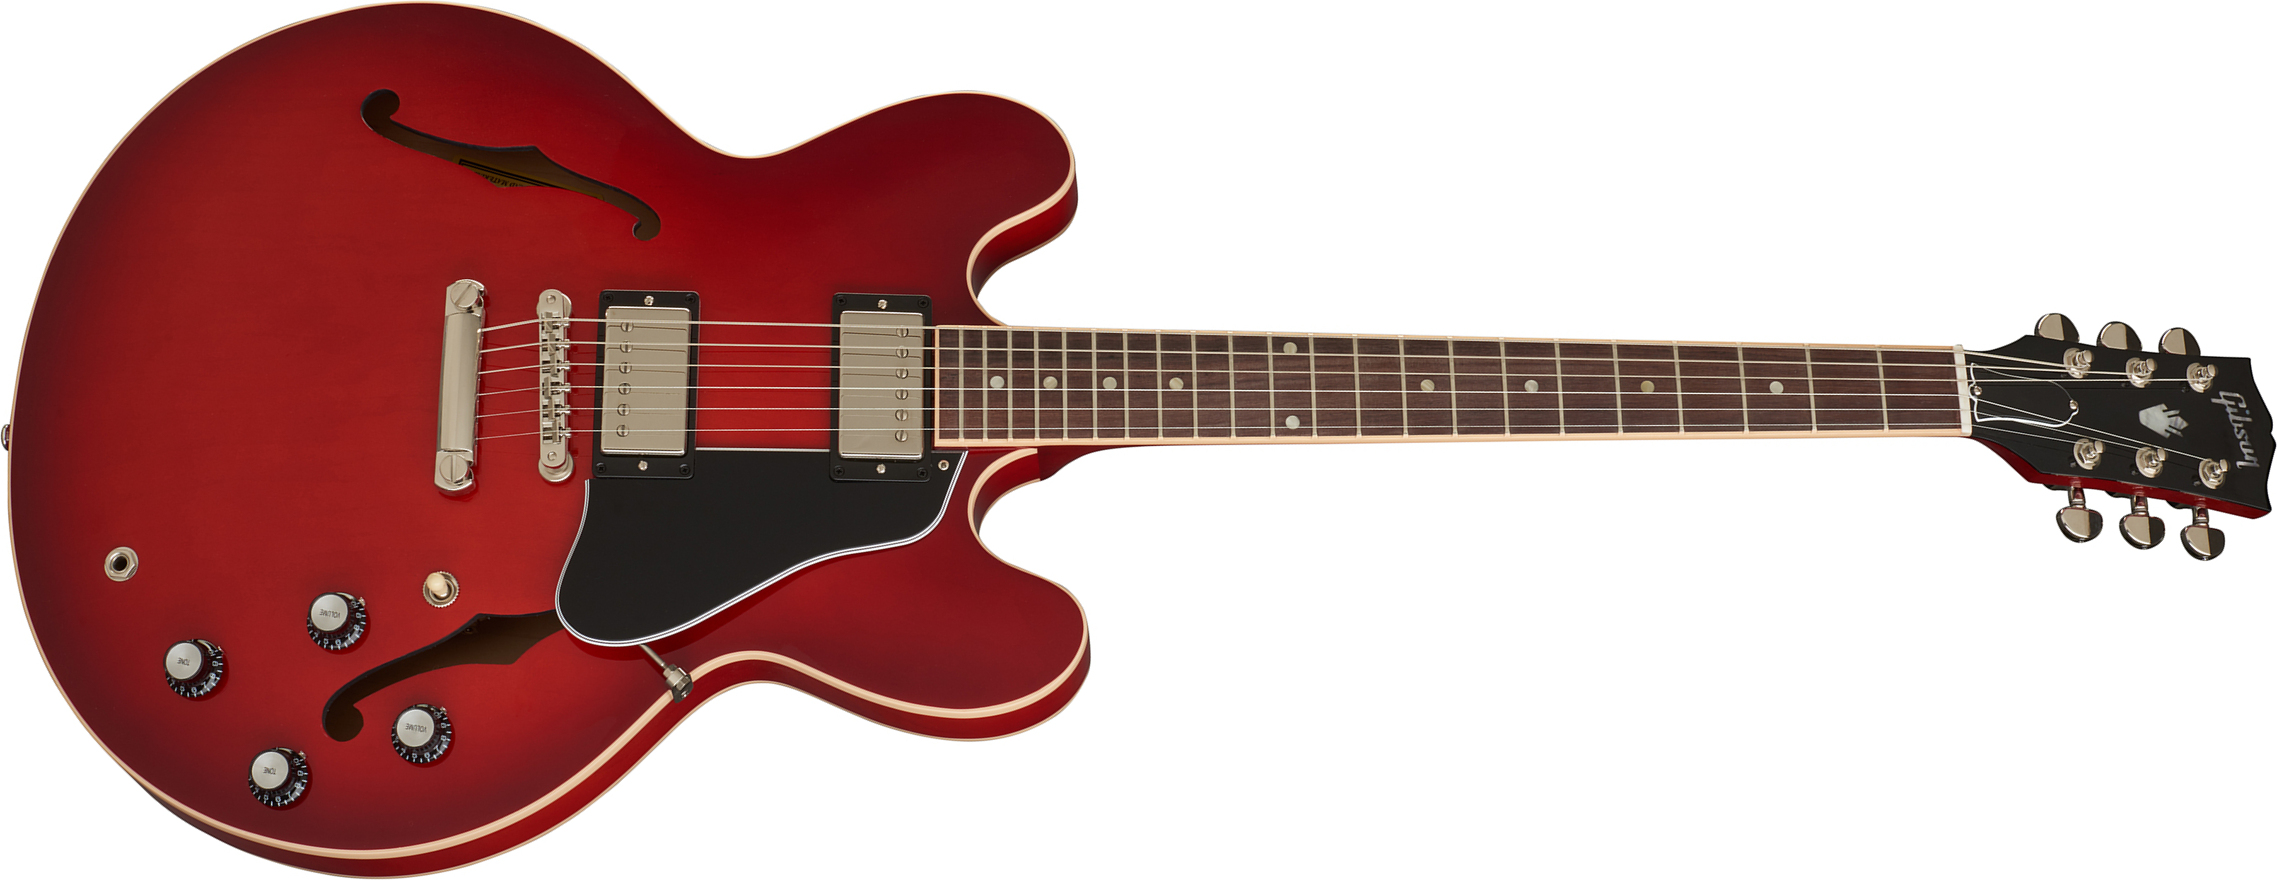 Gibson Es-335 Dot 2019 Hh Ht Rw - Cherry Burst - Semi-hollow electric guitar - Main picture